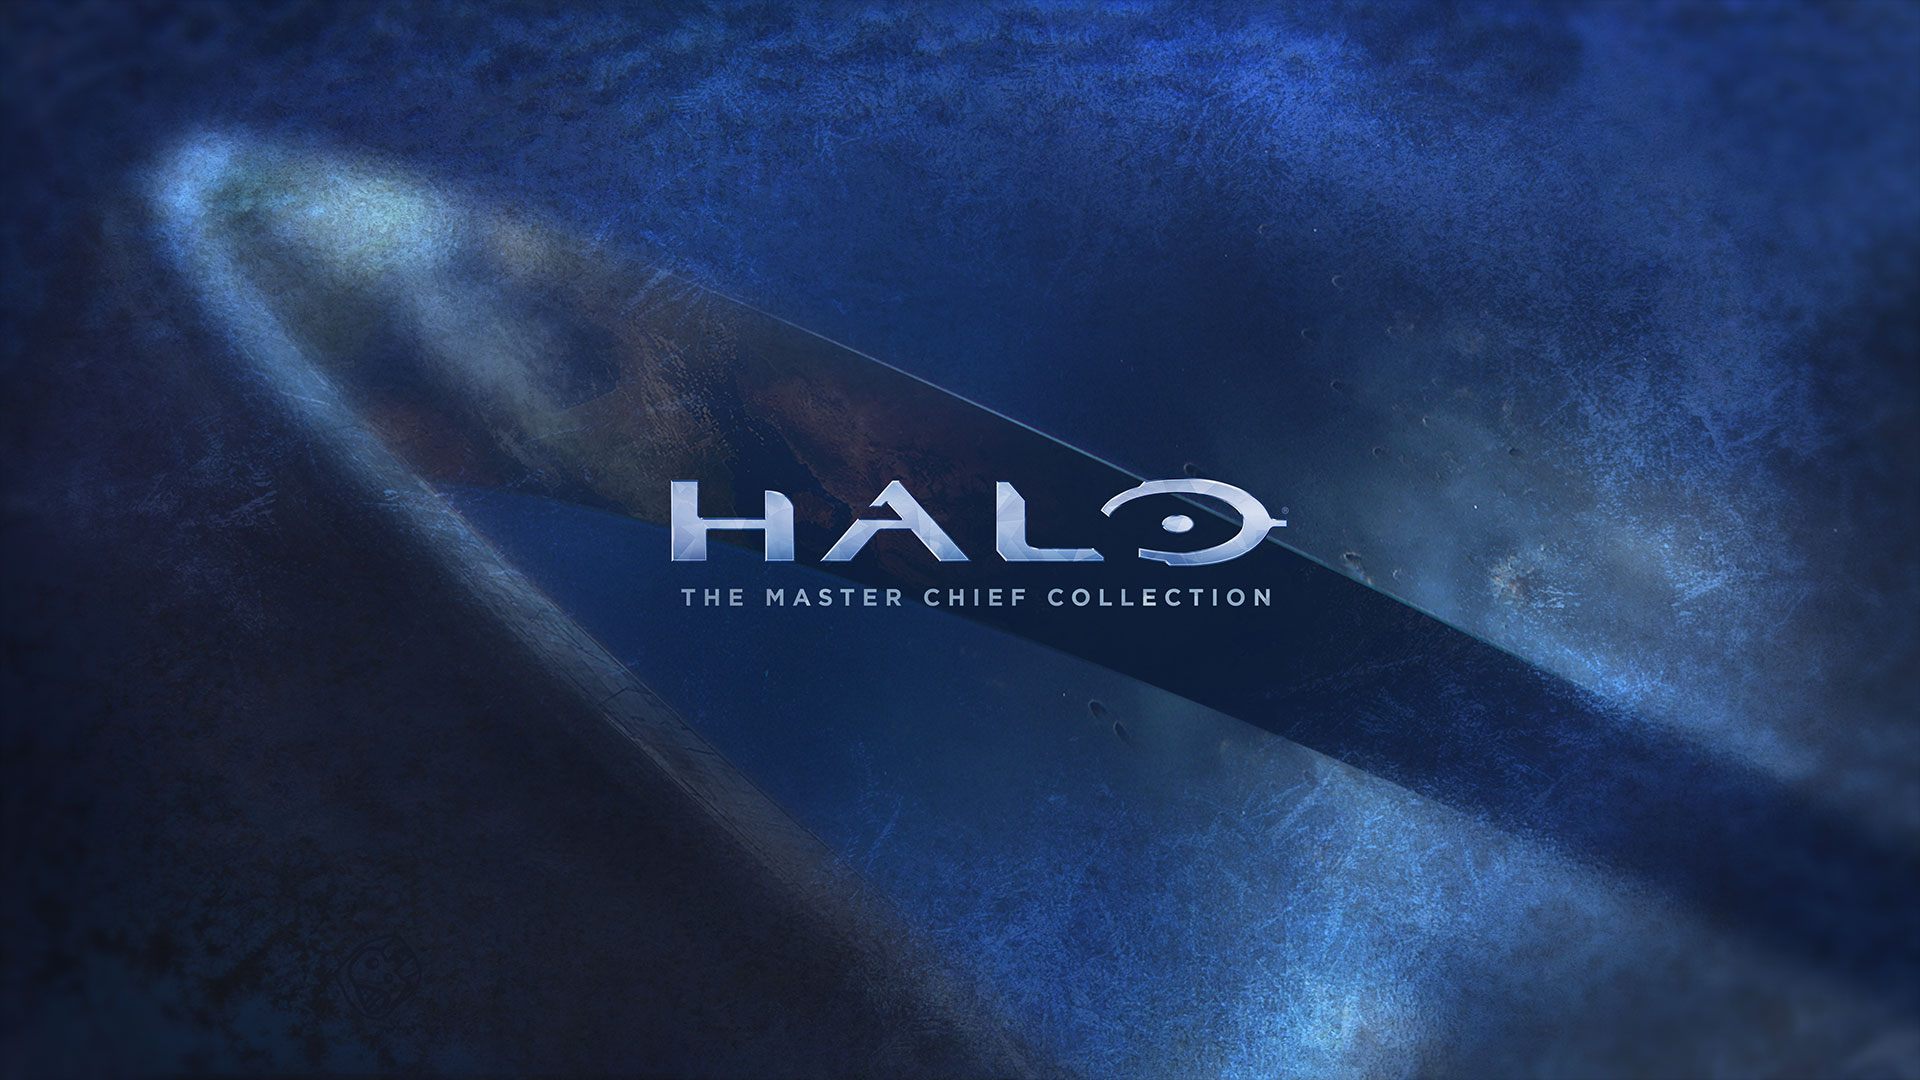 halo-master-chief-collection-news-coming-to-championship-series